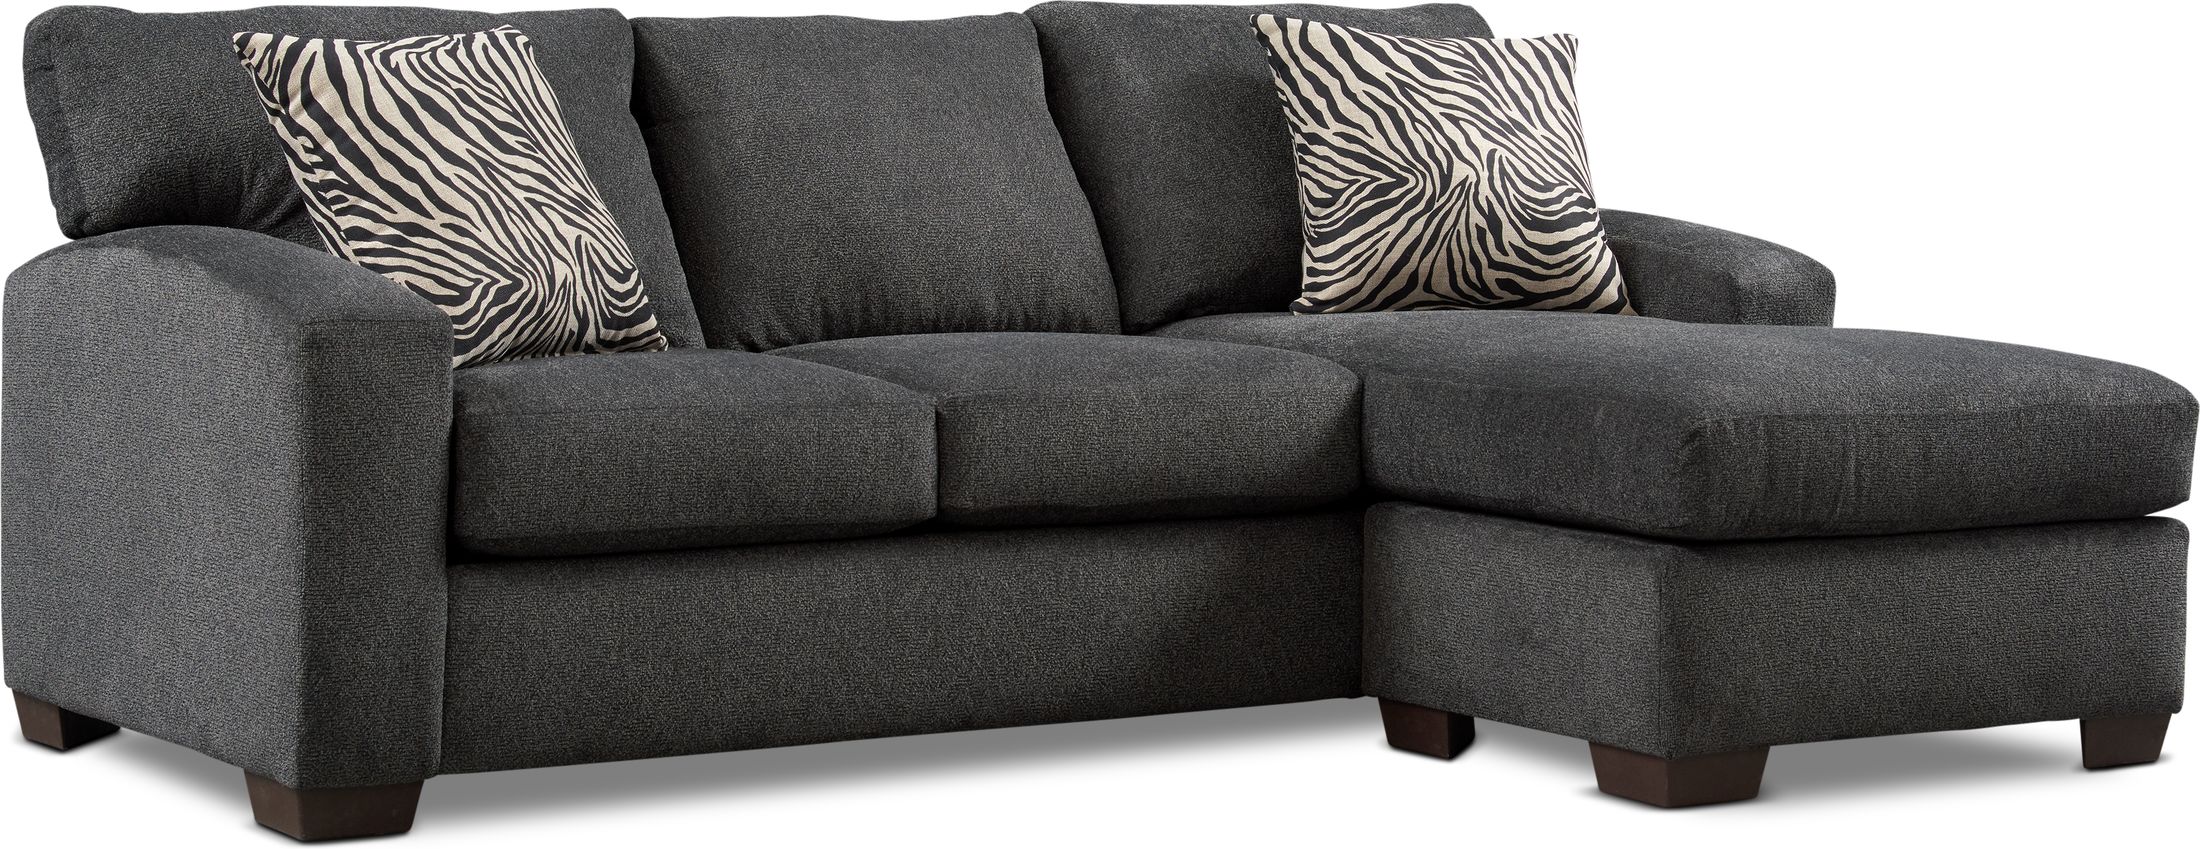 Nala 2 Piece Sectional With Chaise